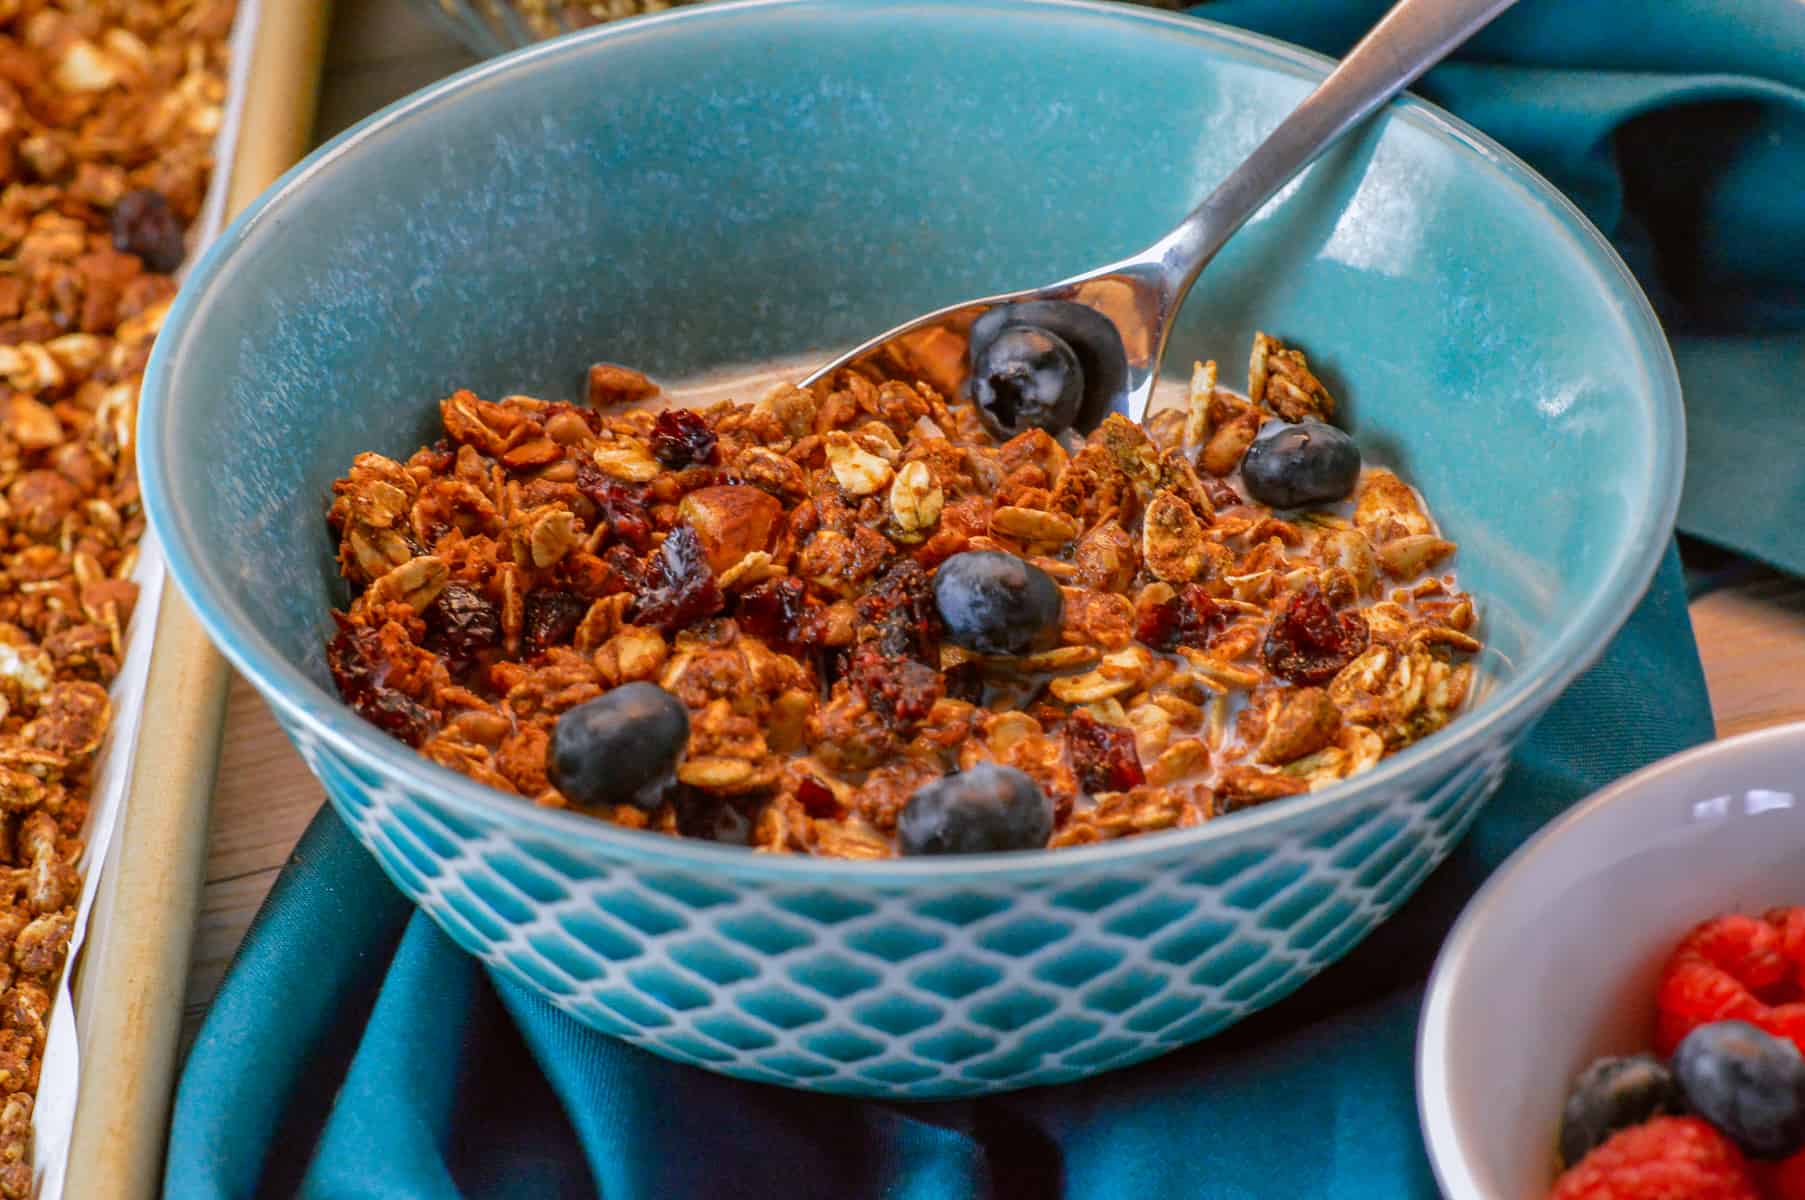 bowl of granola high protein cereal in teal bowl with berries and more berries in a white bowl on the side on a dark teal napkin